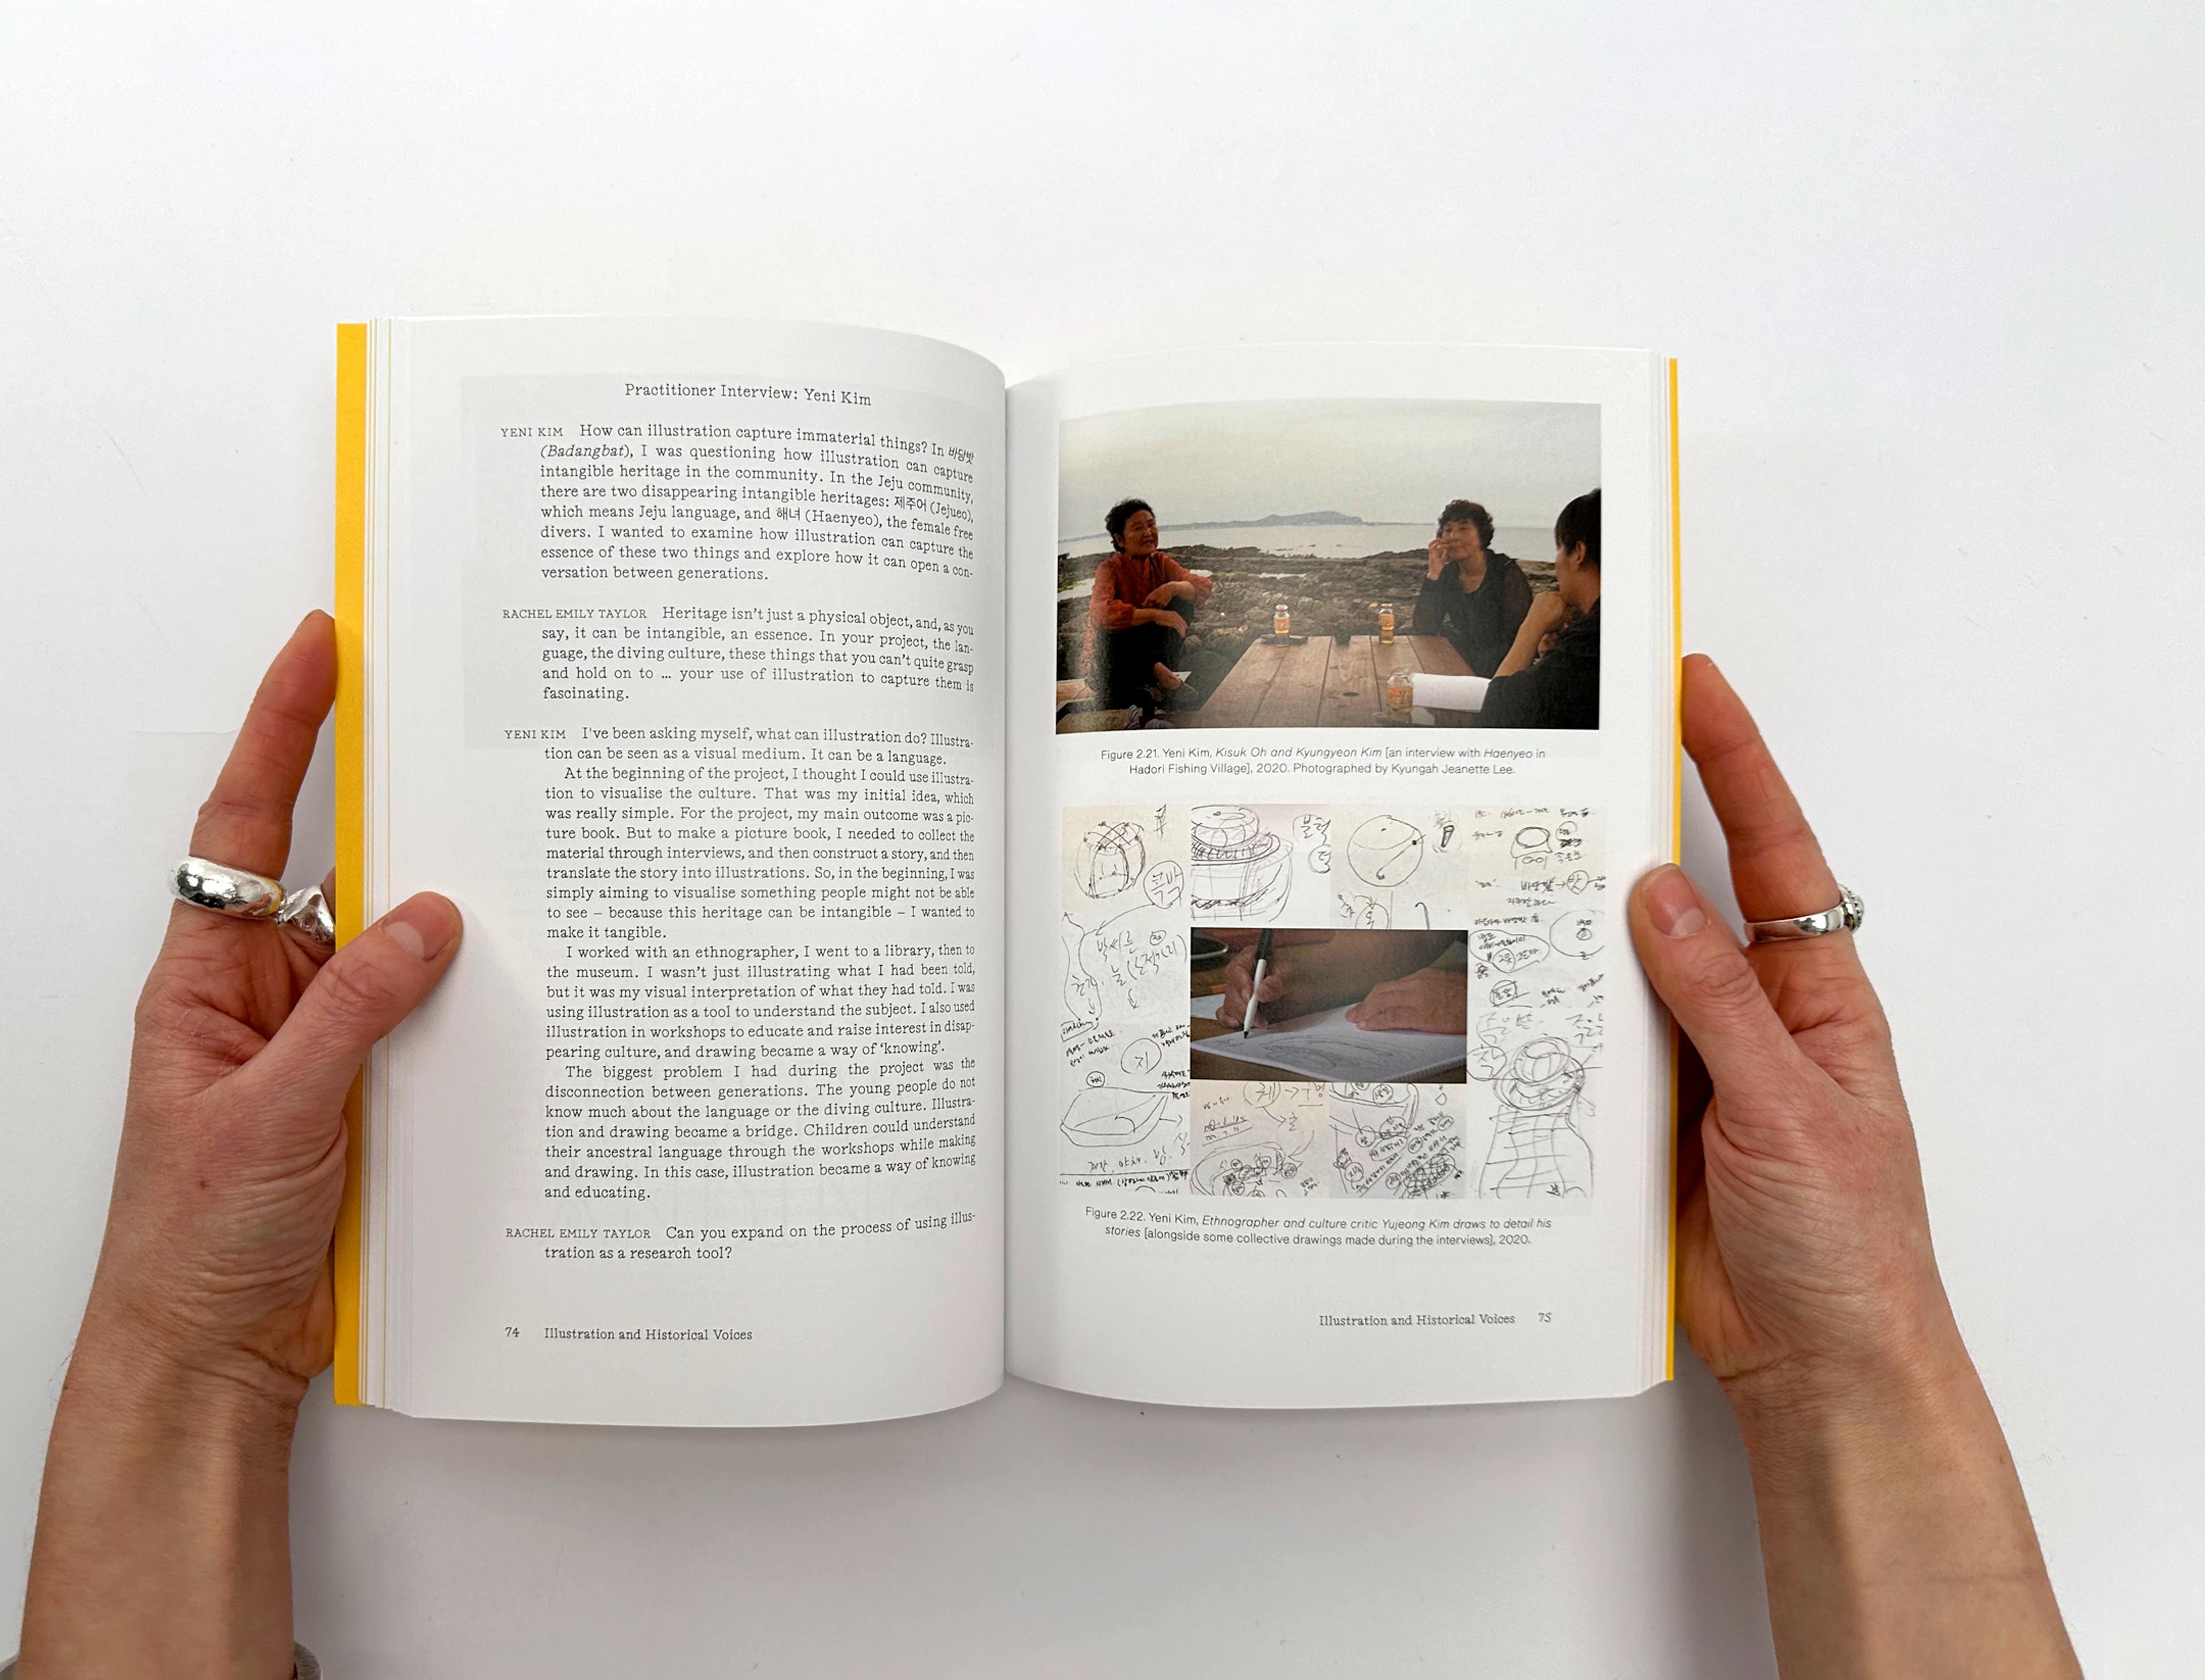 Photograph of two hands opening up a copy of the Illustration and Heritage book.